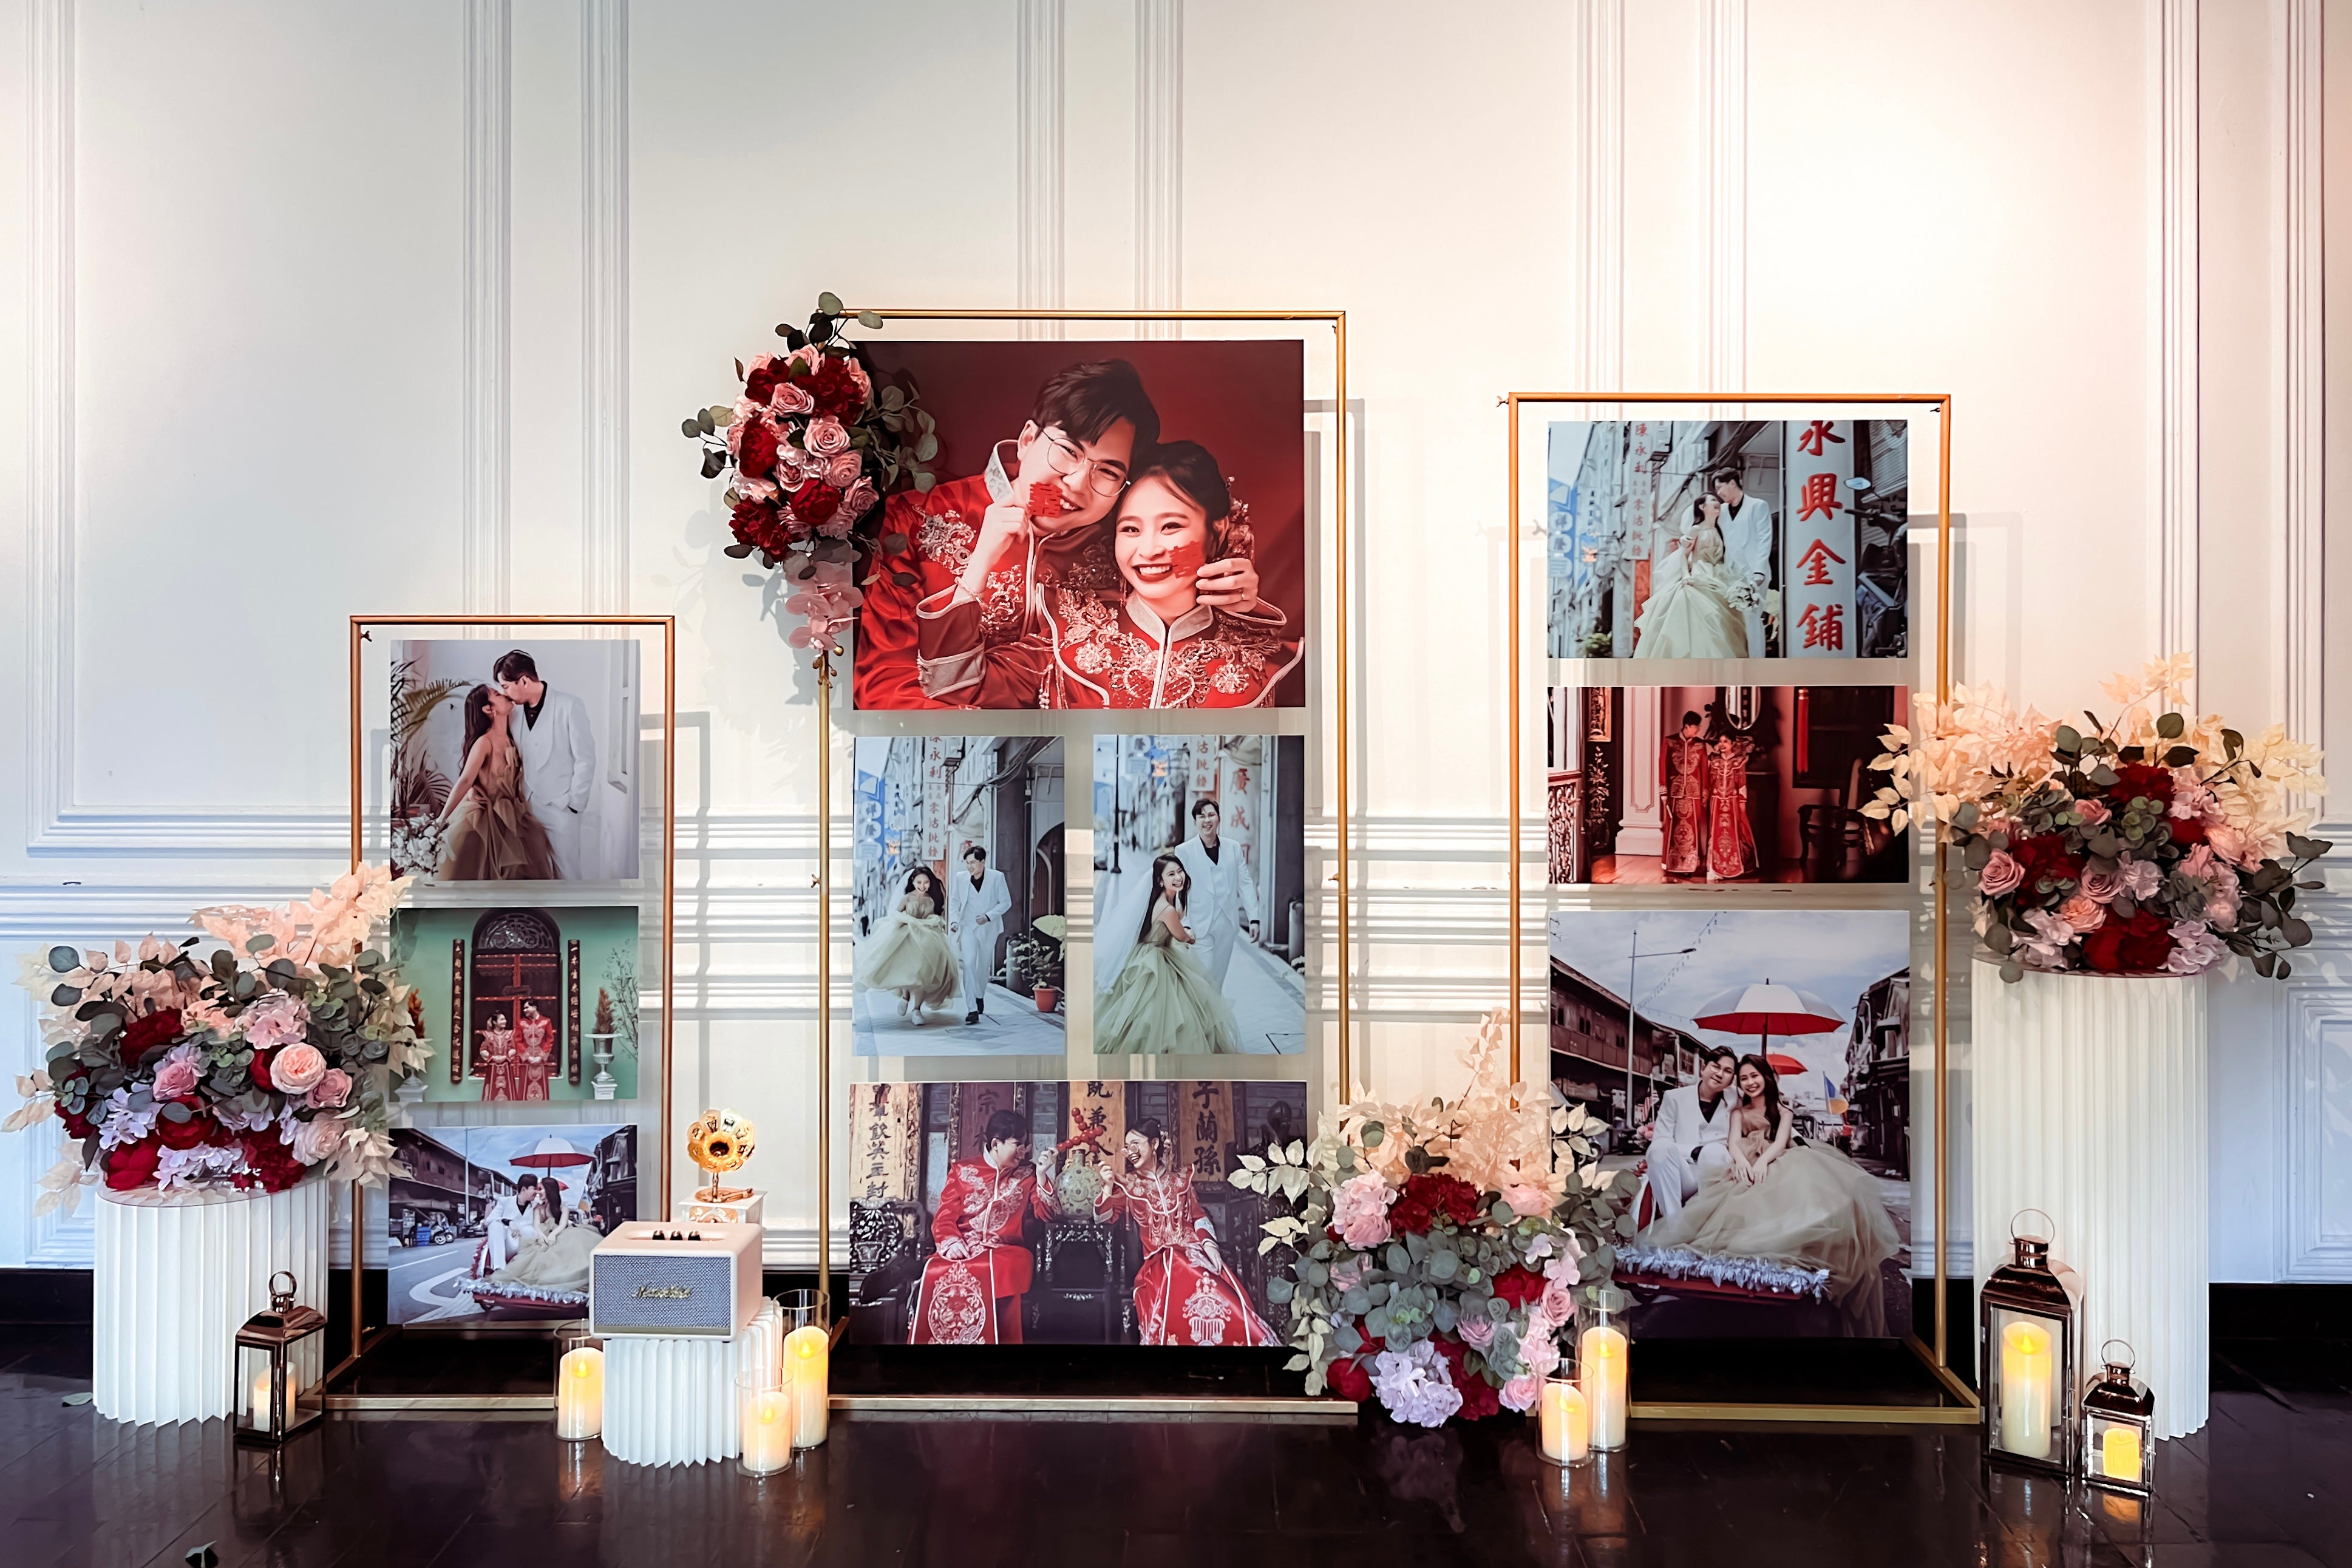 Wedding Reception Decor in Singapore - Multi-stands Photo Gallery with Red & Pink Florals (Venue: The Alkaff Mansion) 